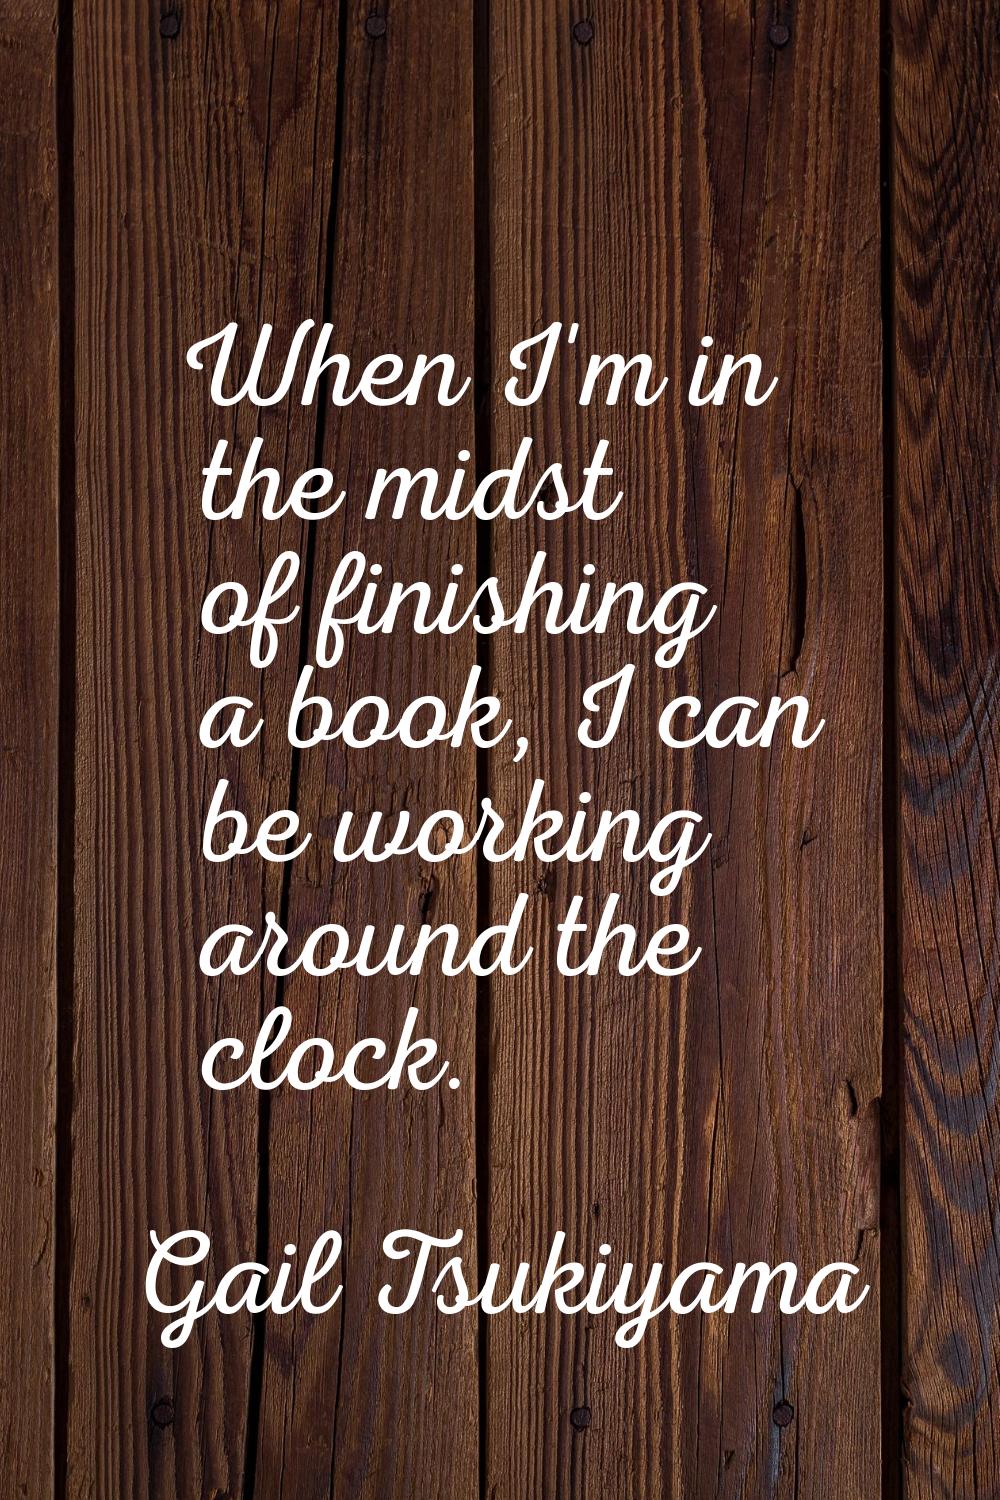 When I'm in the midst of finishing a book, I can be working around the clock.